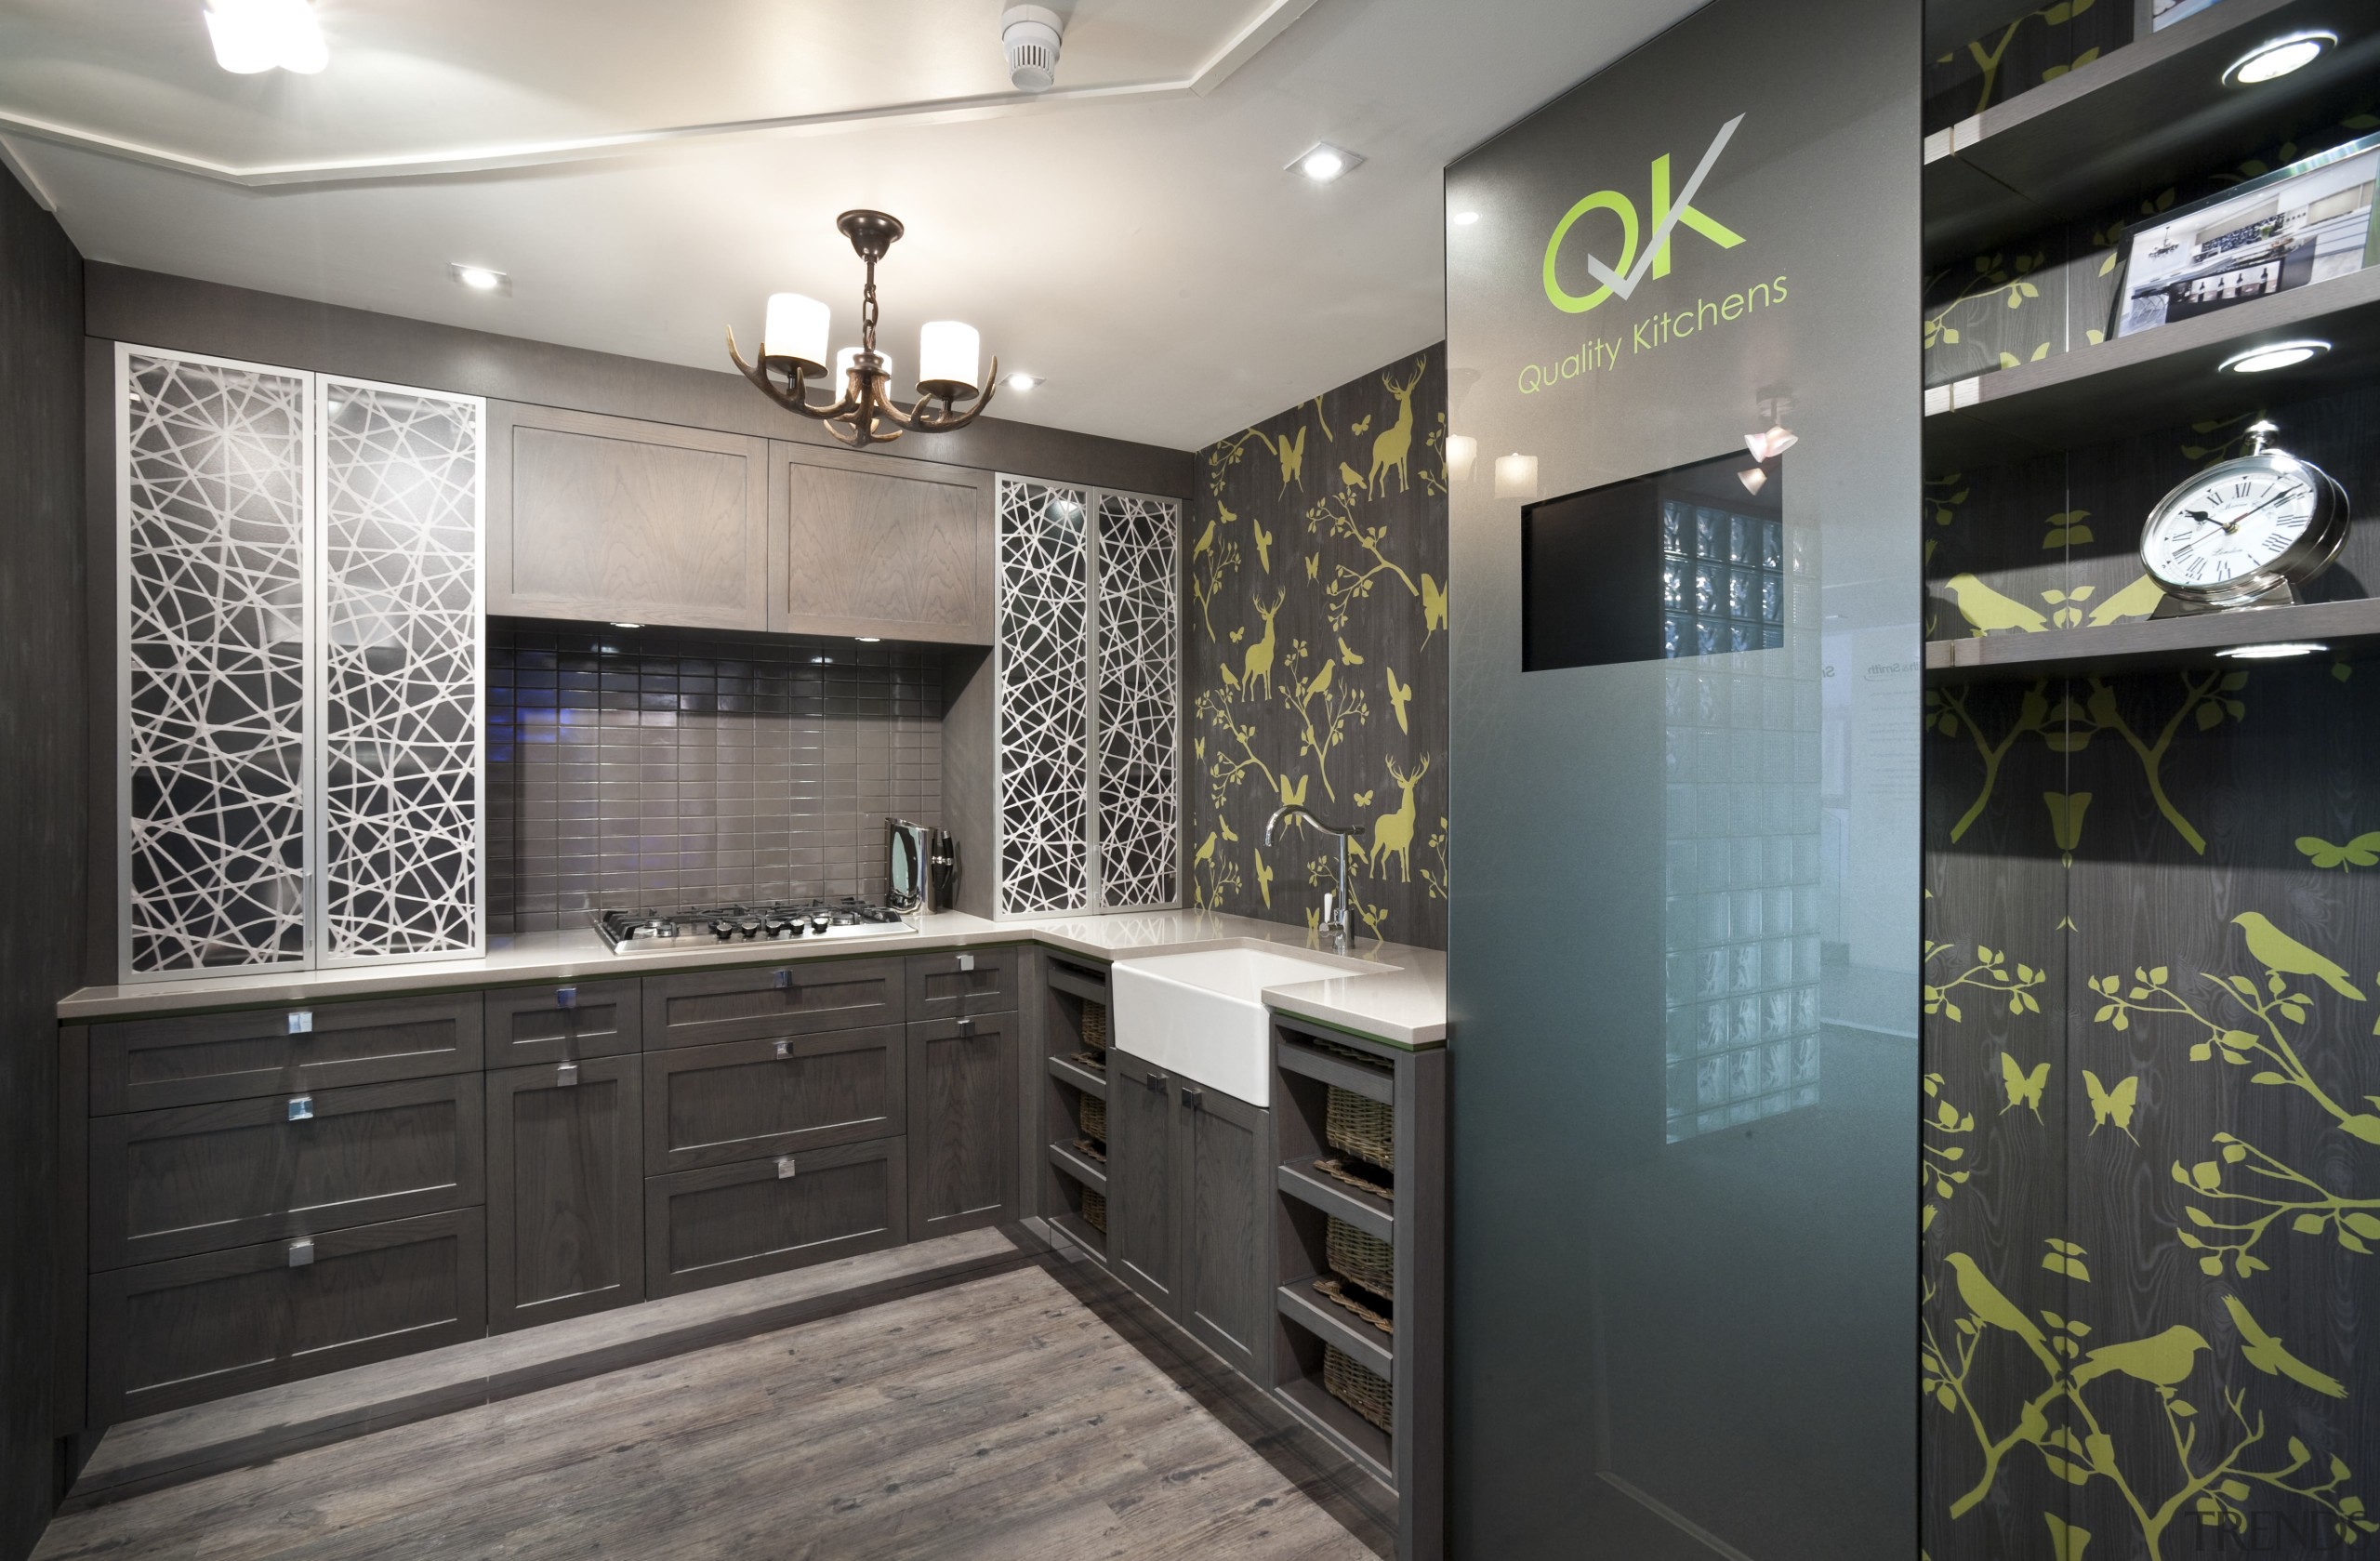 This display kitchen for Quality Kitchens showcases aluminium-framed countertop, interior design, kitchen, real estate, room, gray, black